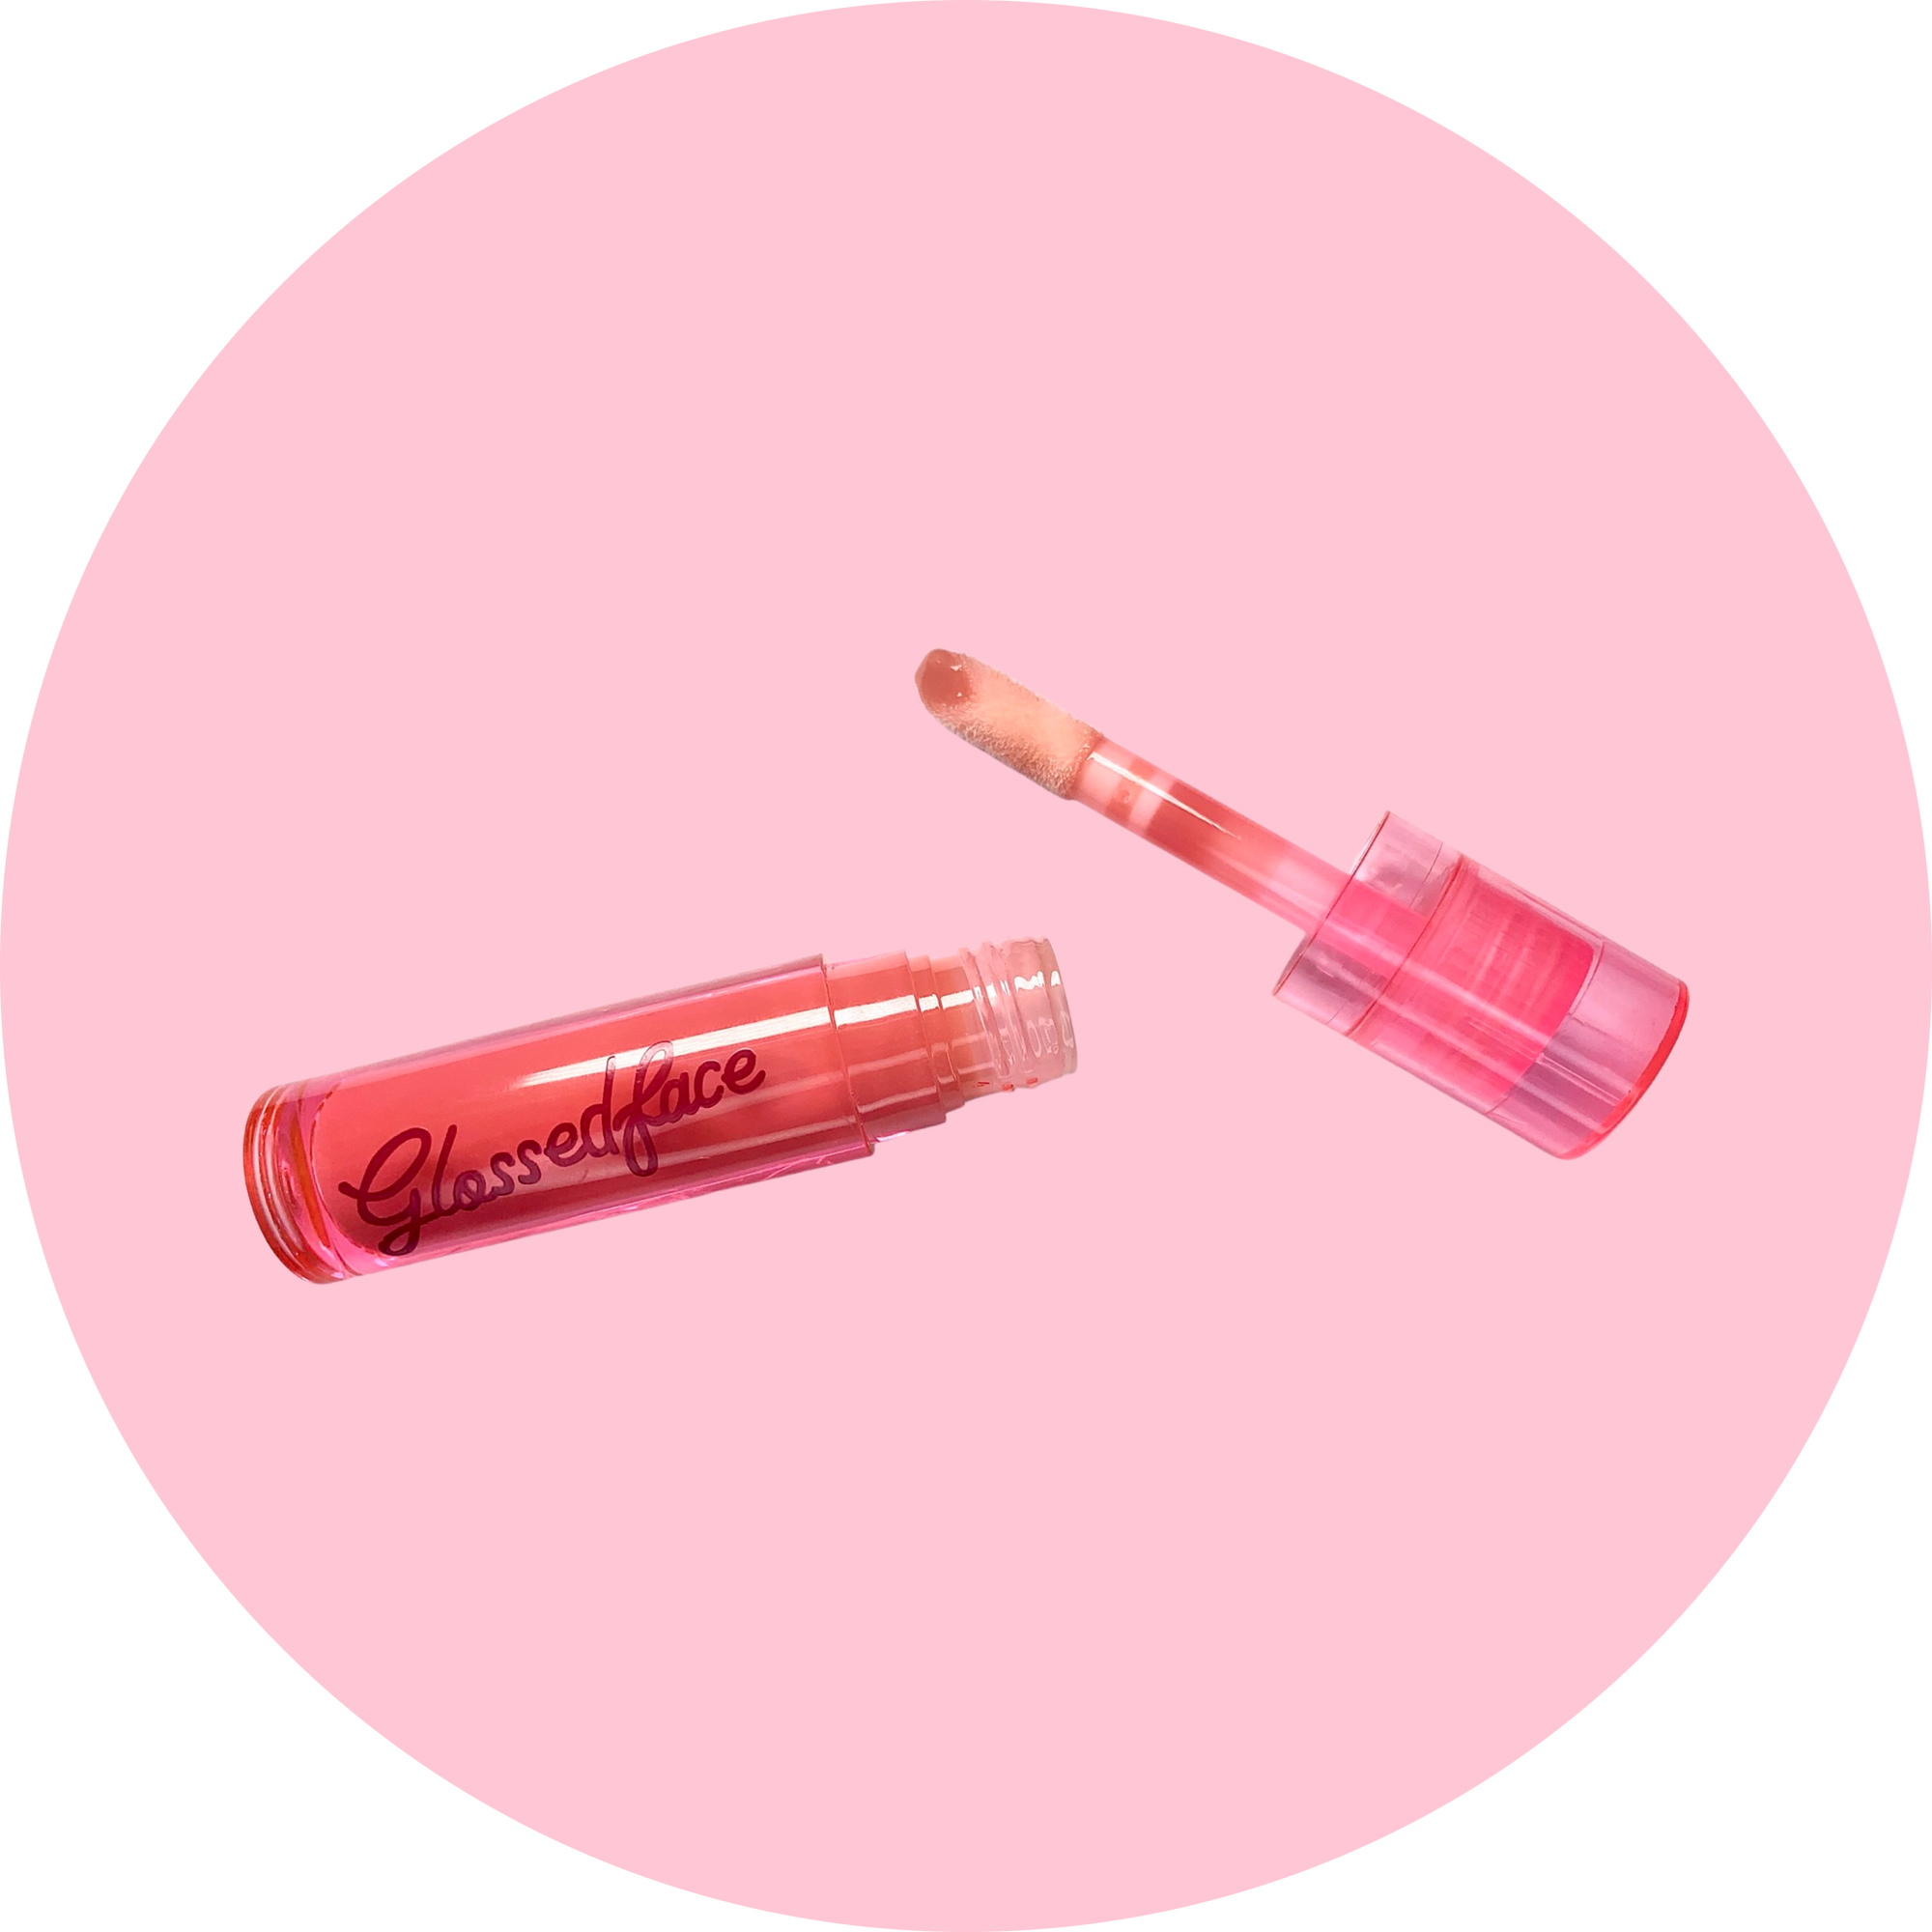 Caramel ● The Glossed™ Hydrating Lip Dew NudeFace Chile